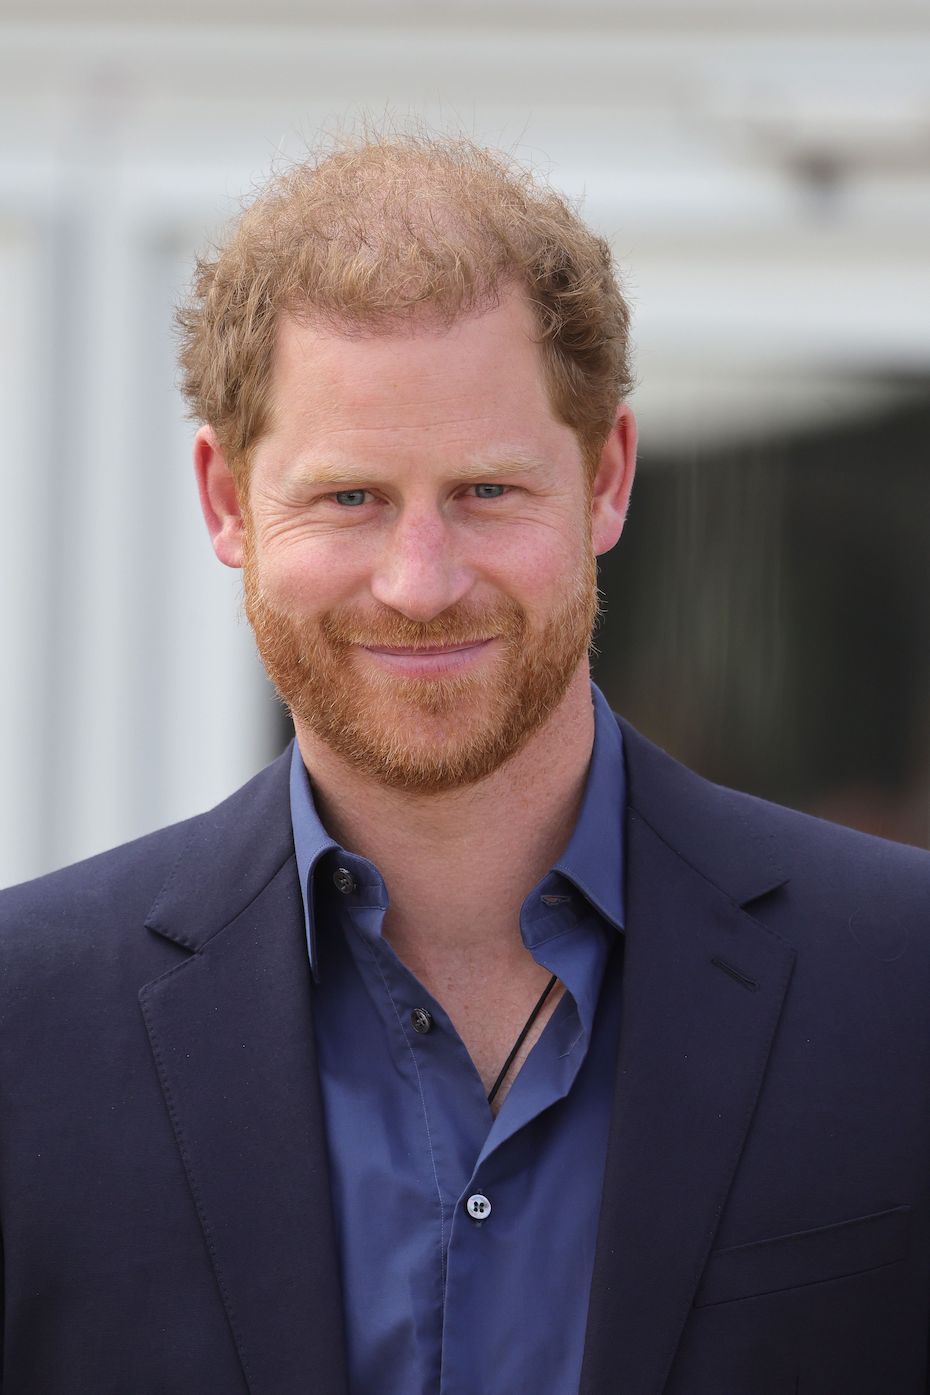 Prince Harry says he lost his virginity in a field behind a pub